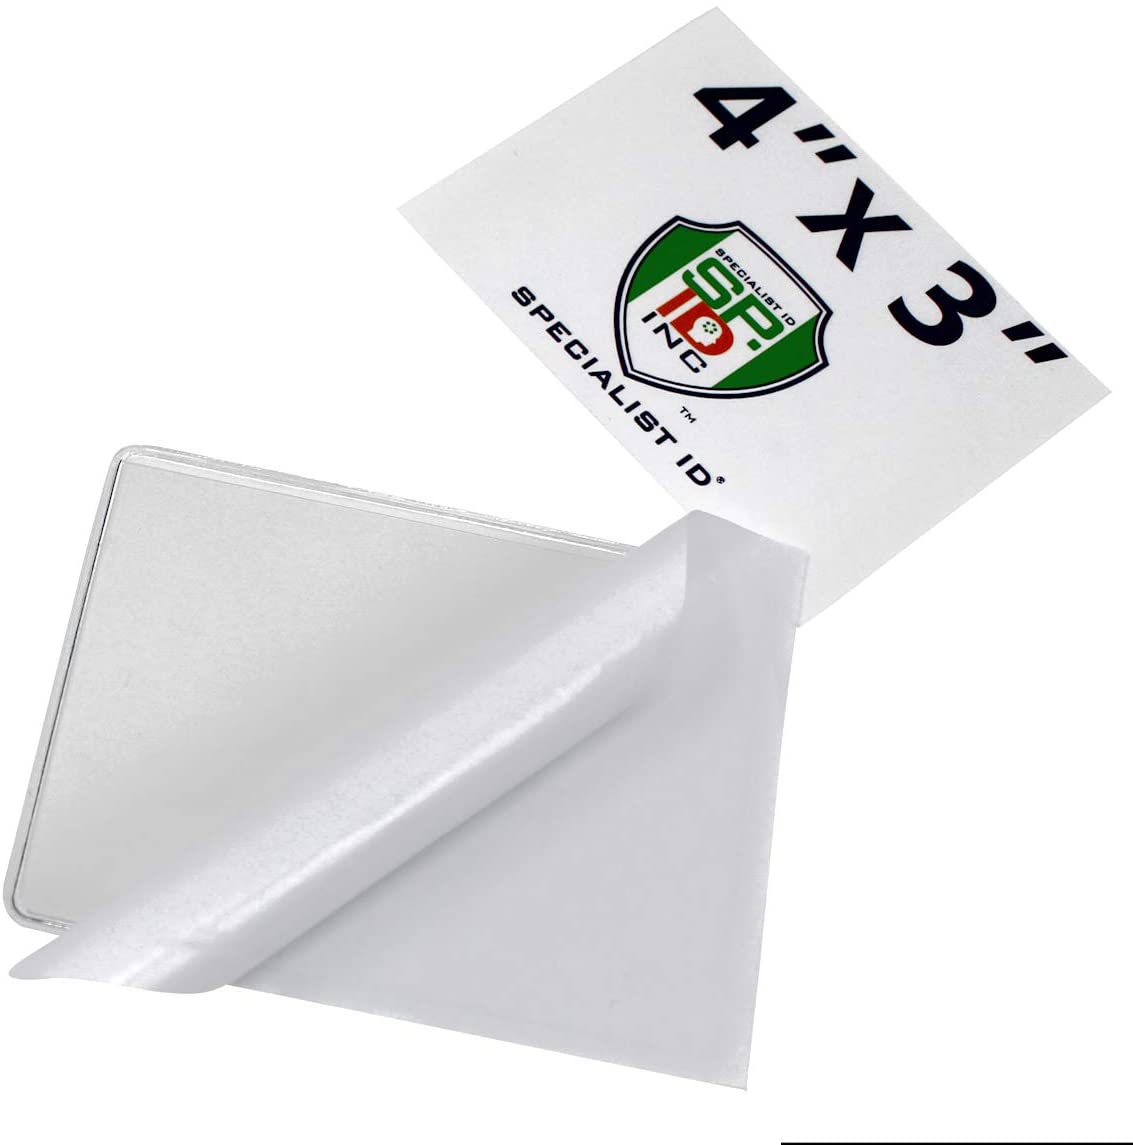 Large 4 x 3 Adhesive Badge Holders with Sticky Back - Clear Vinyl Parking Pass Holders for Windshield (CE-4P) CE-4P